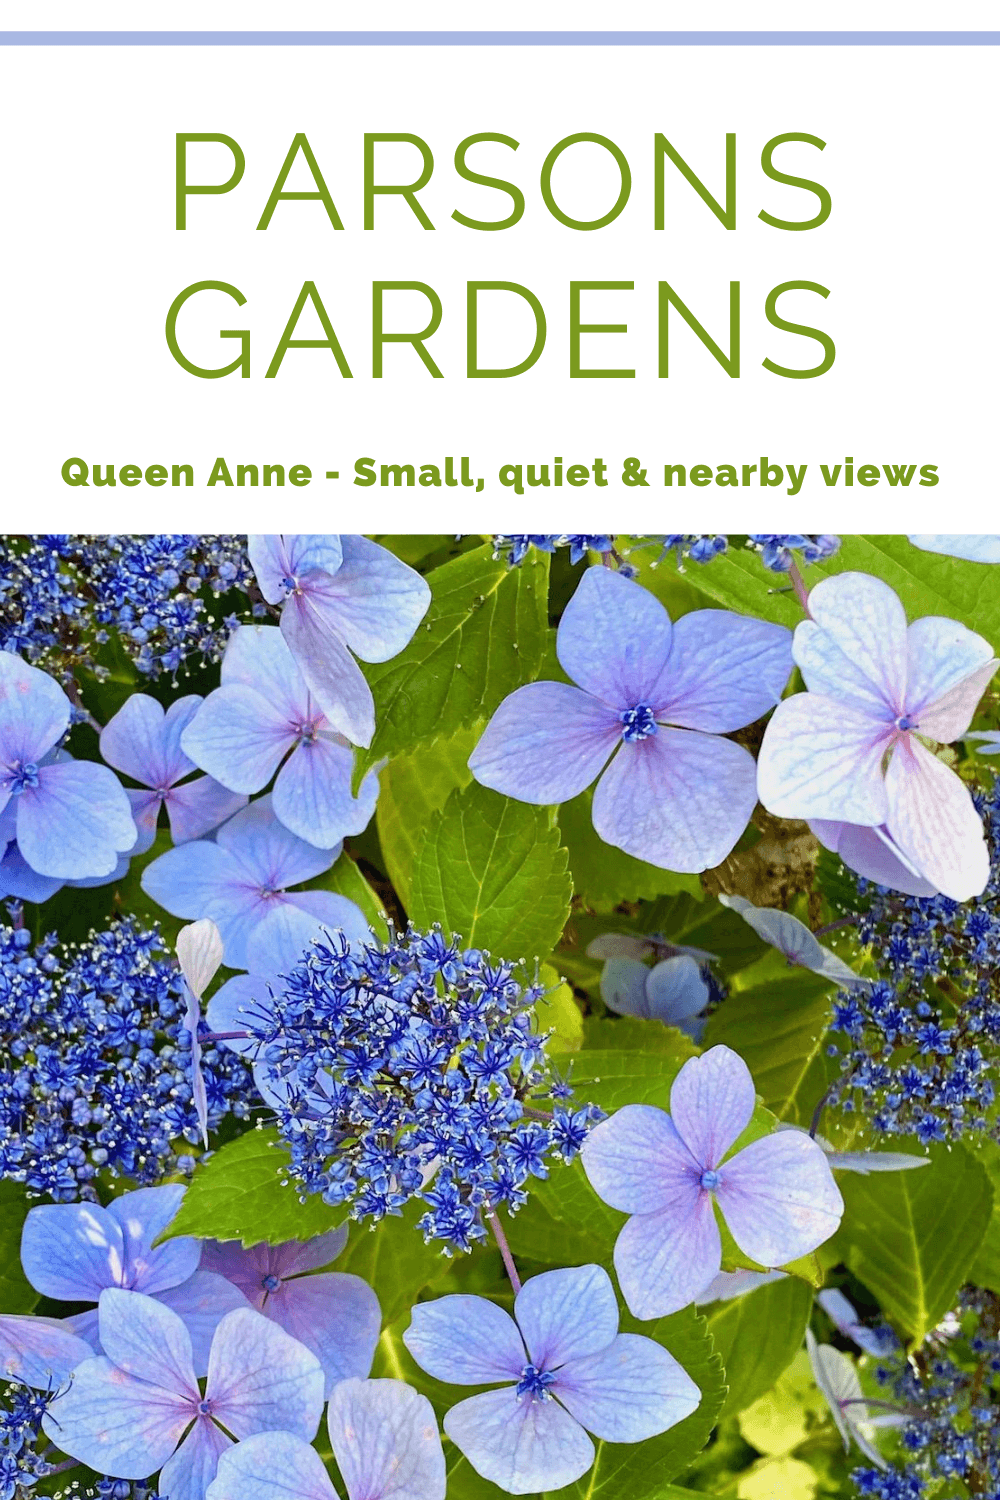 Parsons Gardens is one of the best botanical spaces on Queen Anne in Seattle, including these blue and purple hydrangea blooms that are in amongst lime green leaves and tighter pre-blooms.